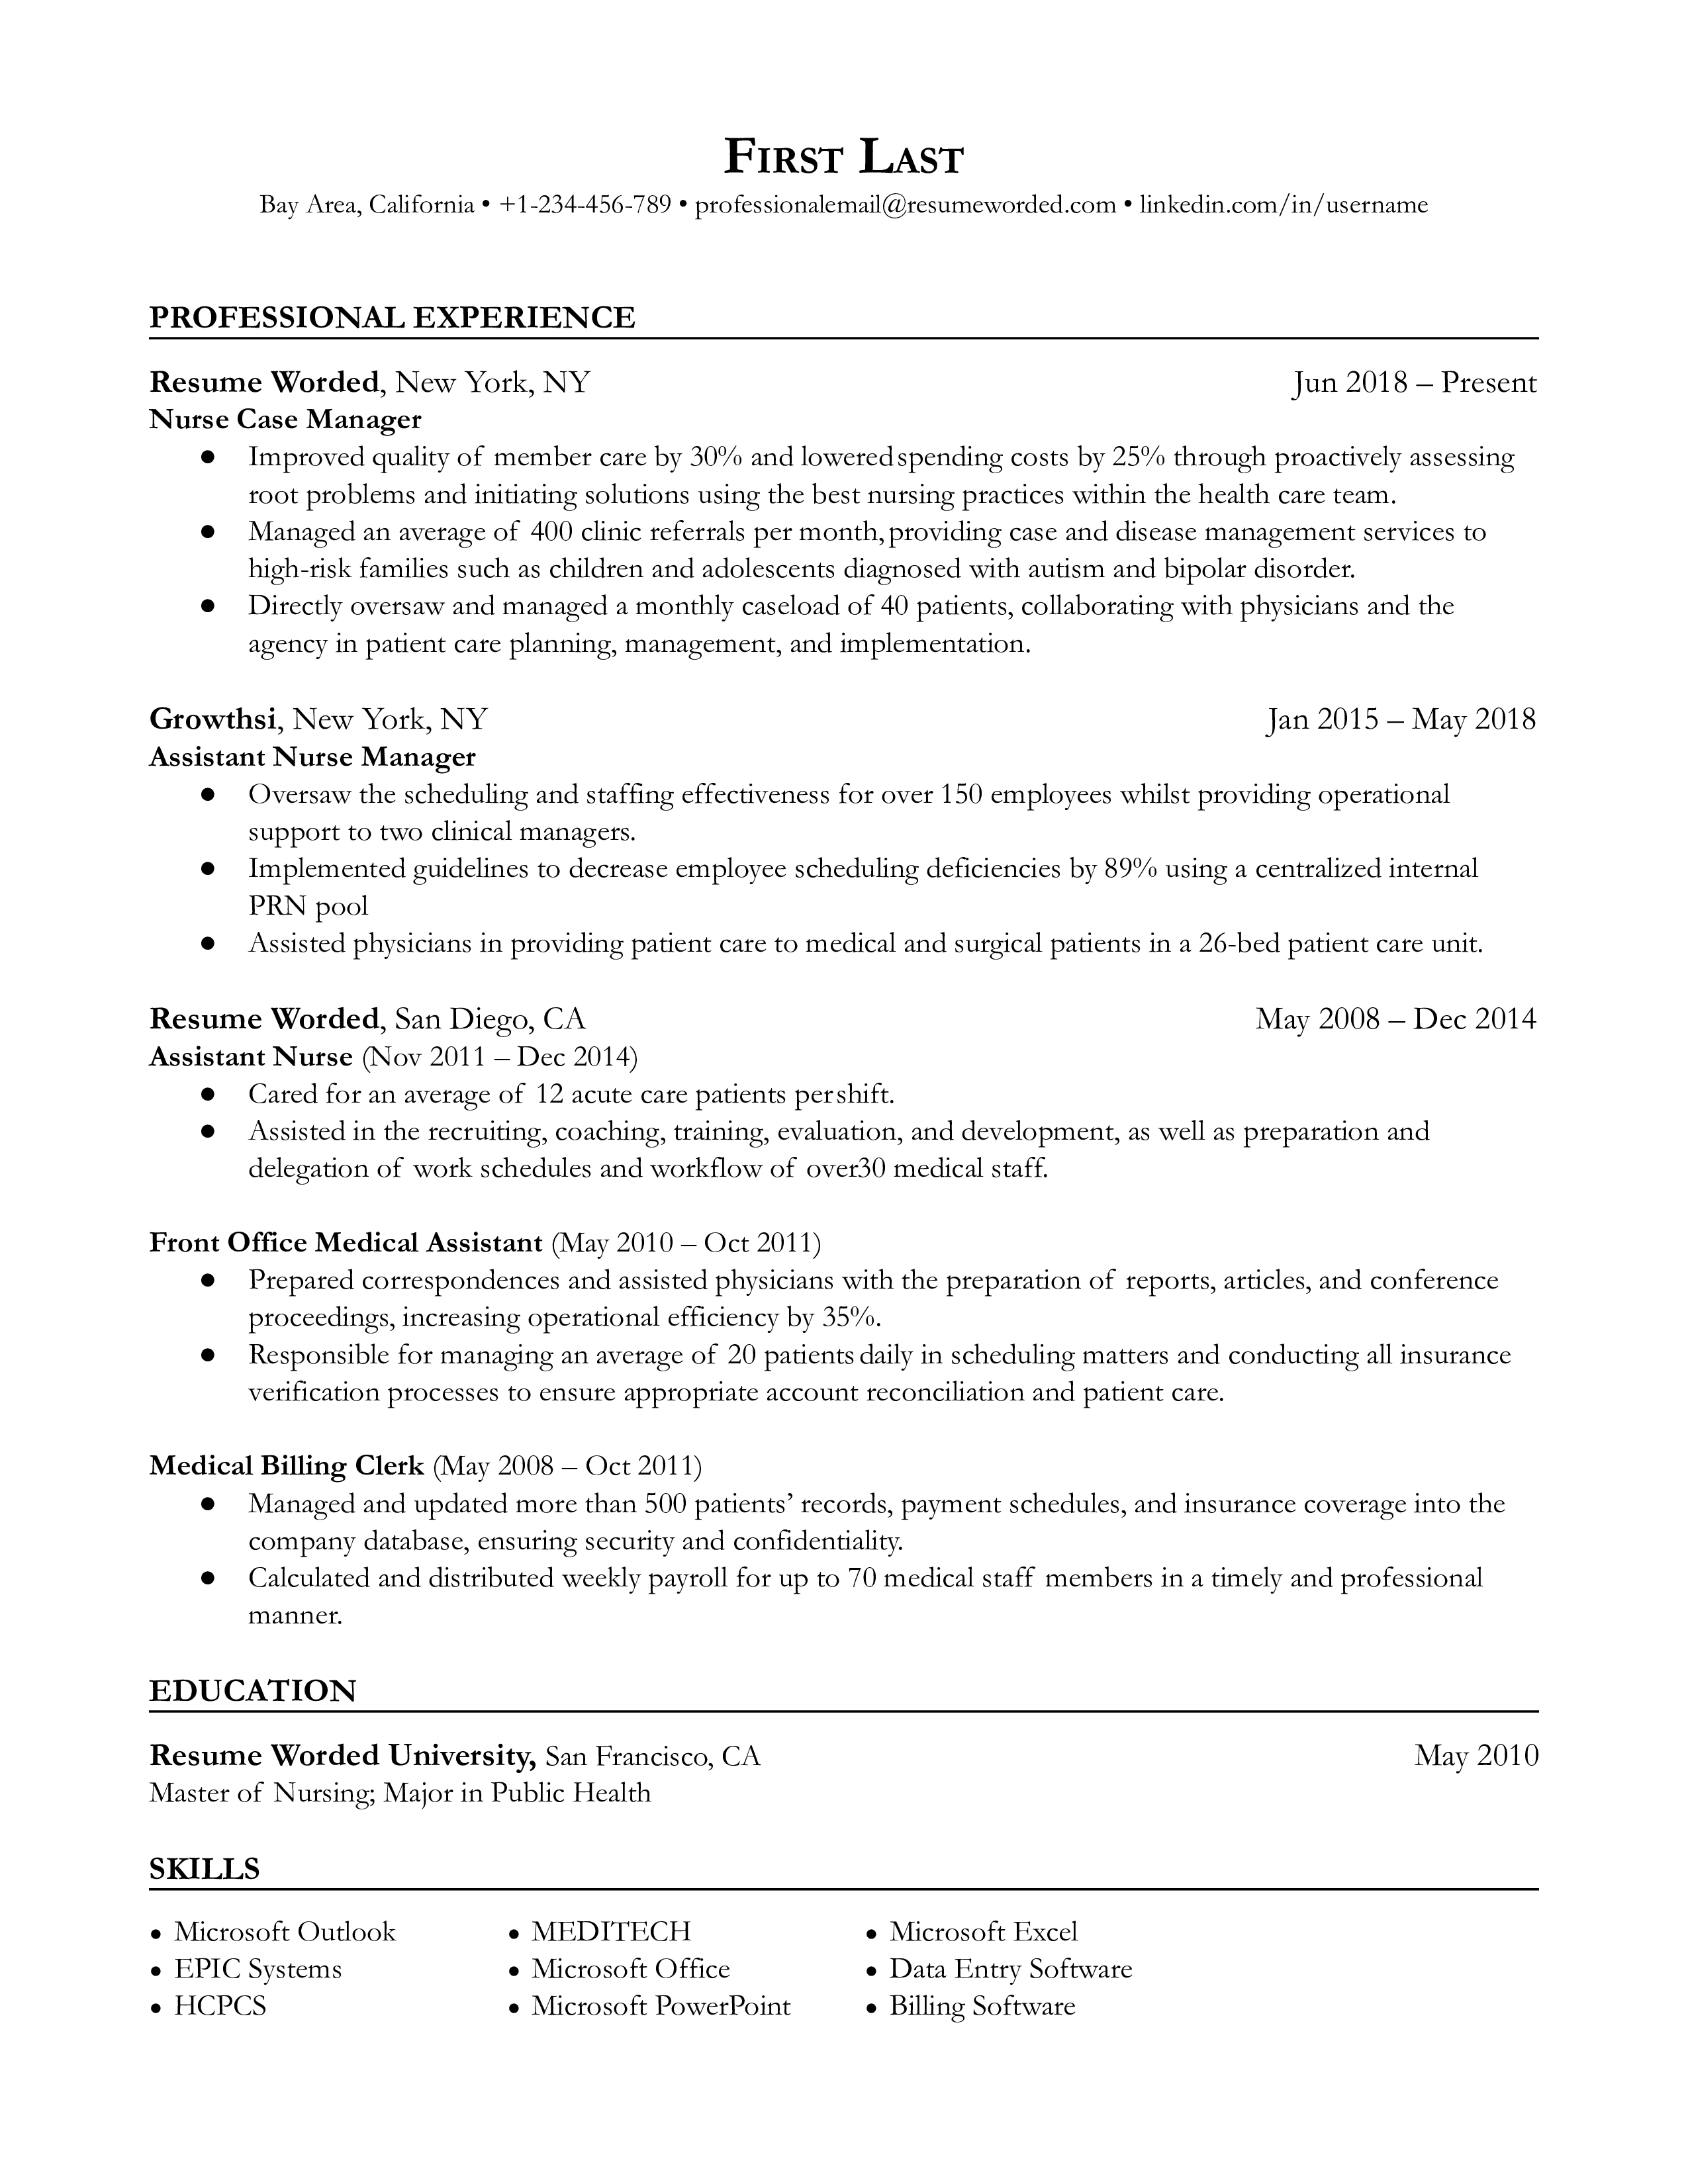 Nurse Case Manager Resume Template + Example